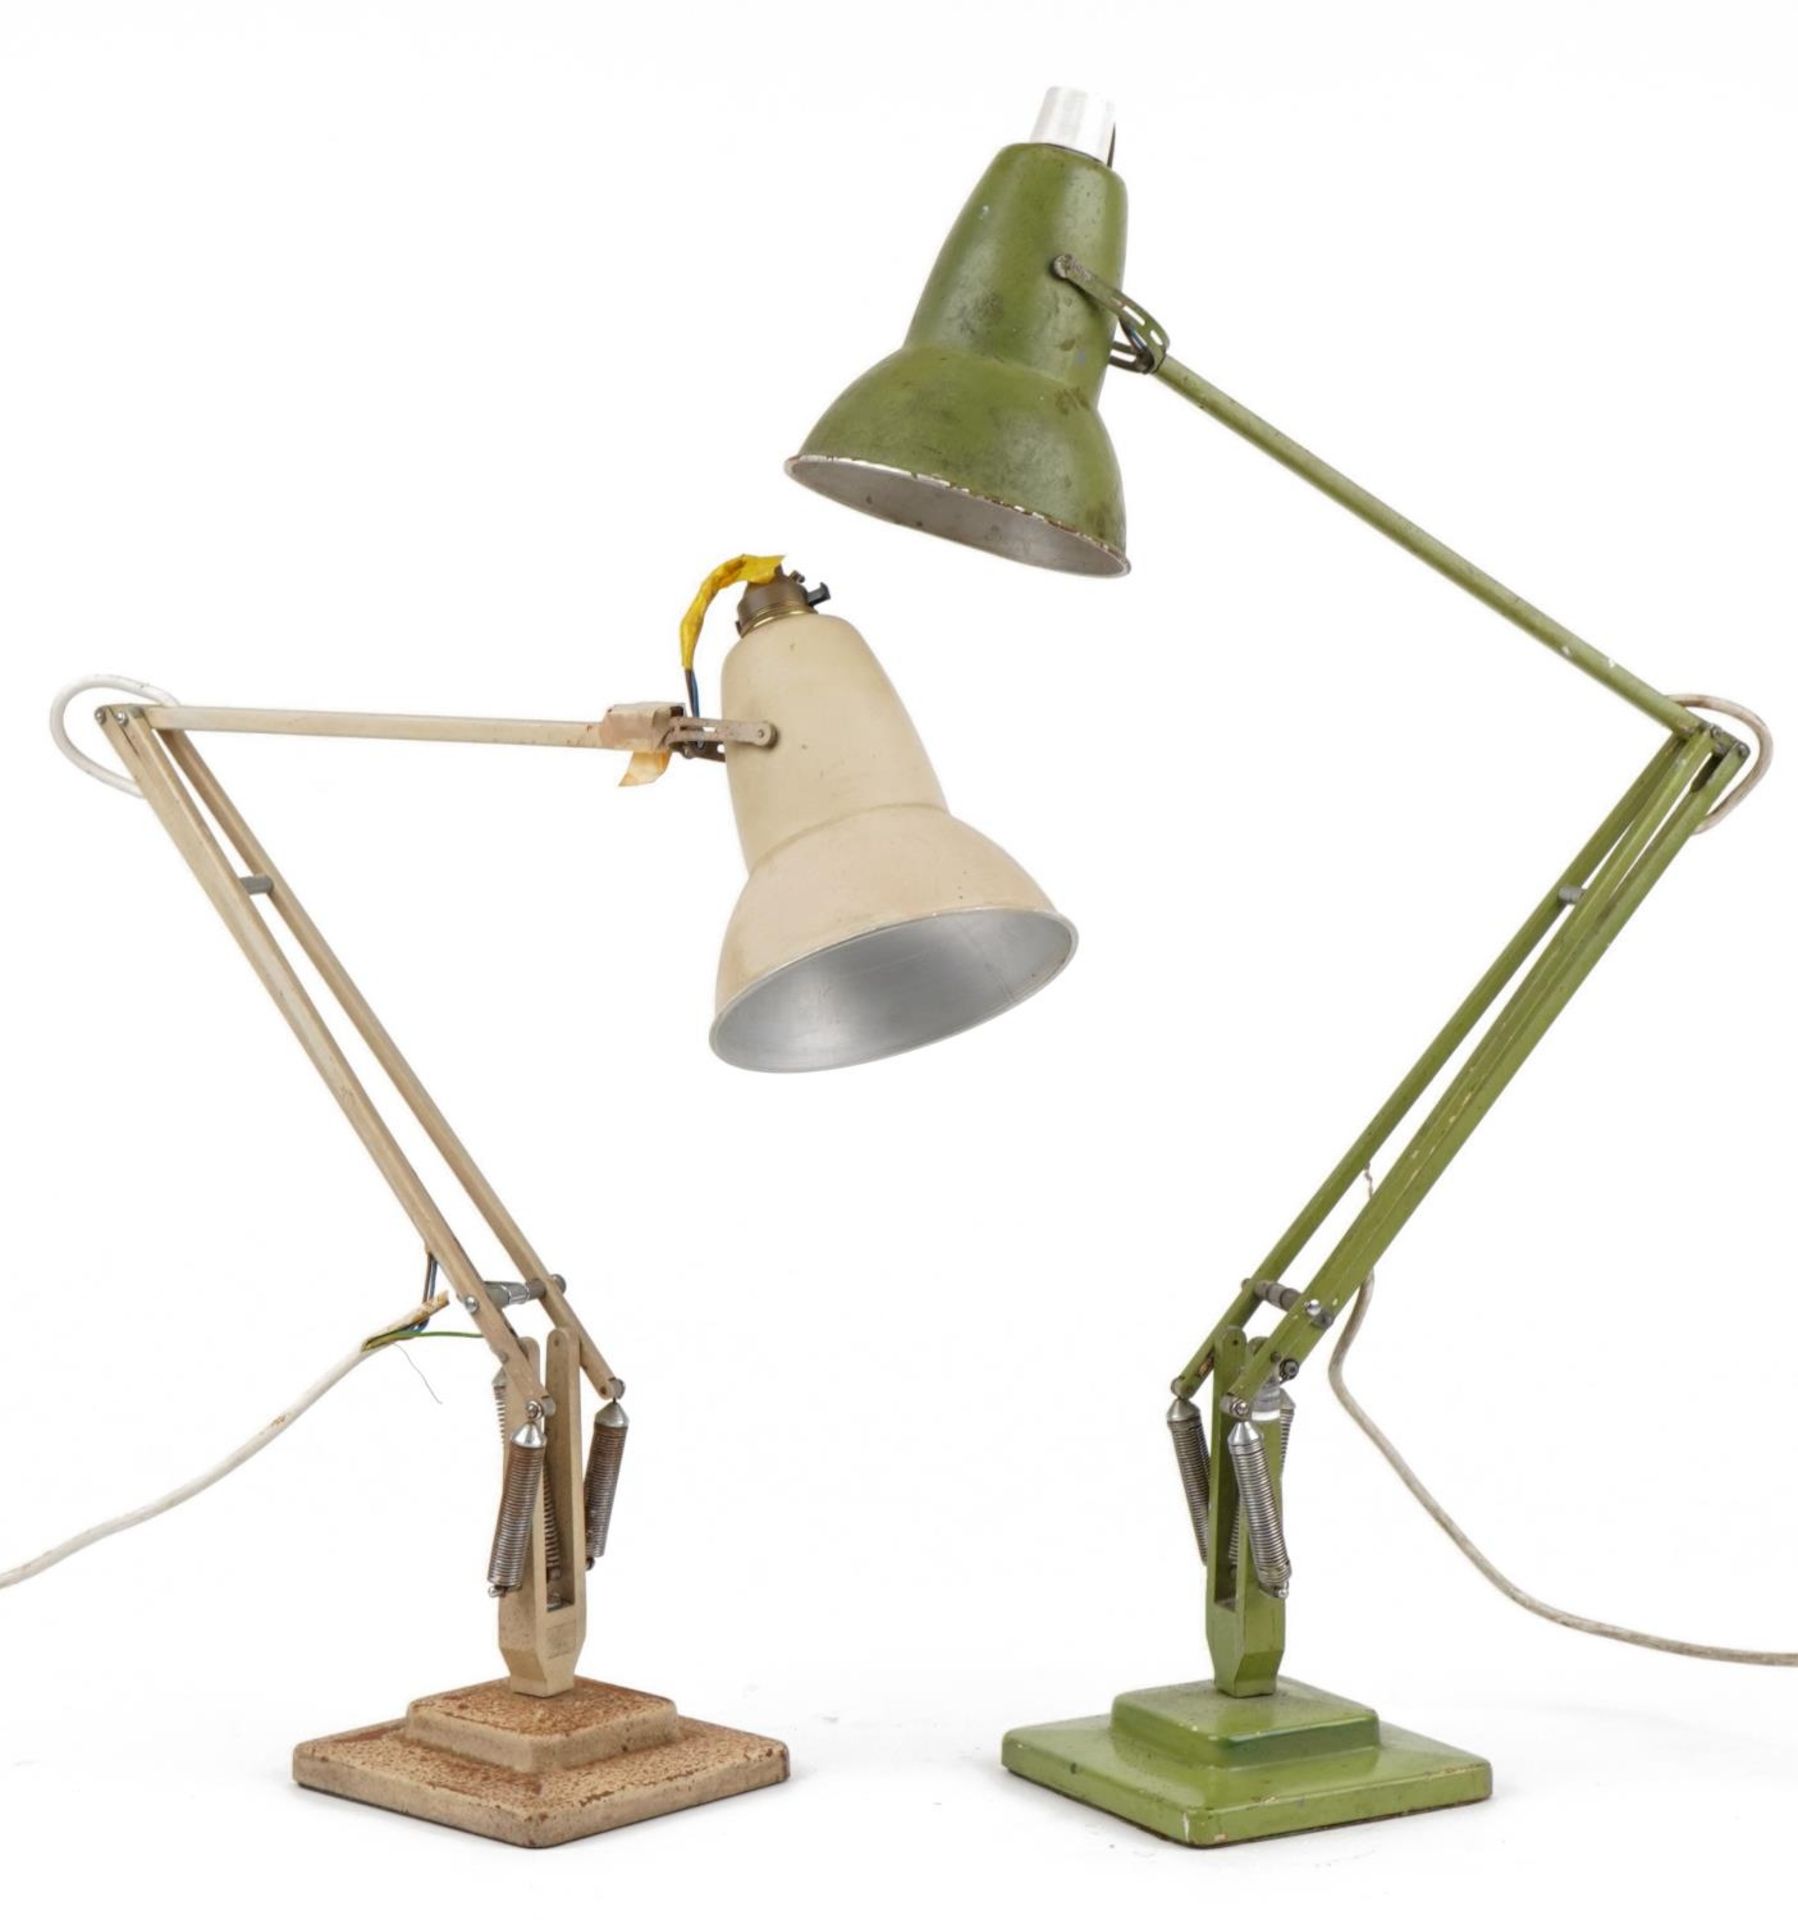 Two vintage Herbert Terry two step Anglepoise lamps : For further information on this lot please